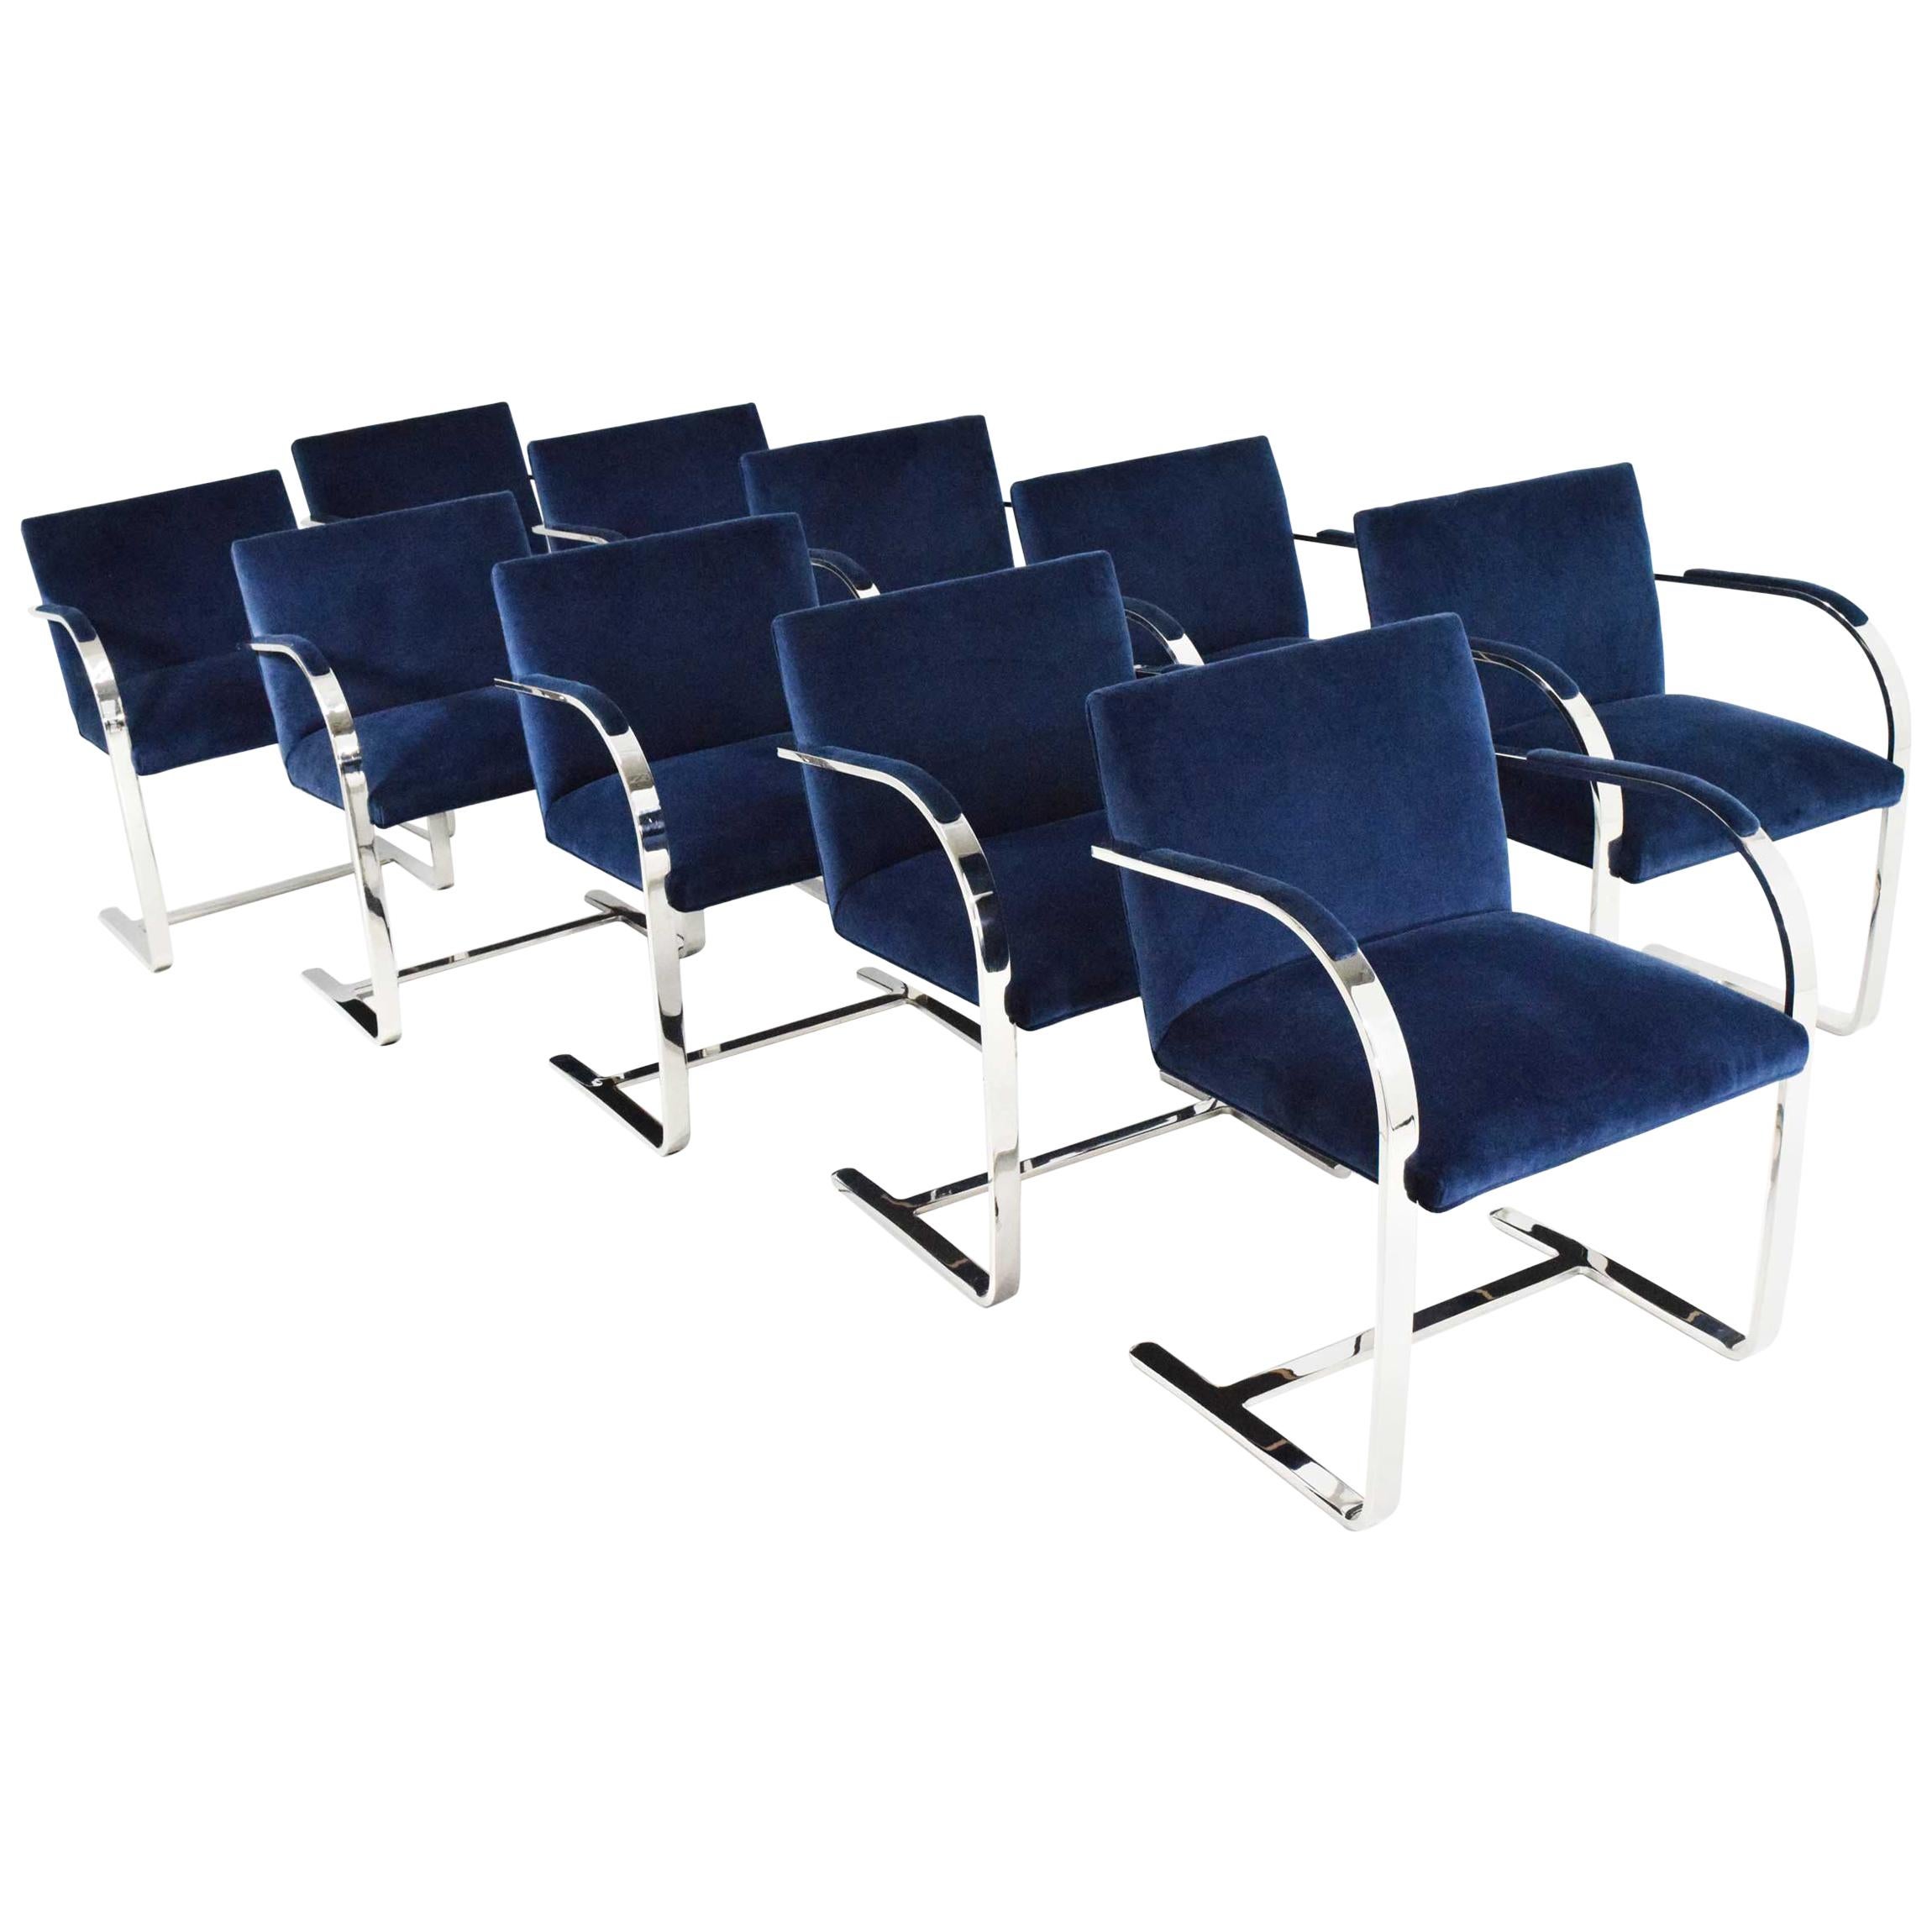 Set of Ten Stainless Steel Flatbar Brno Chairs by Knoll